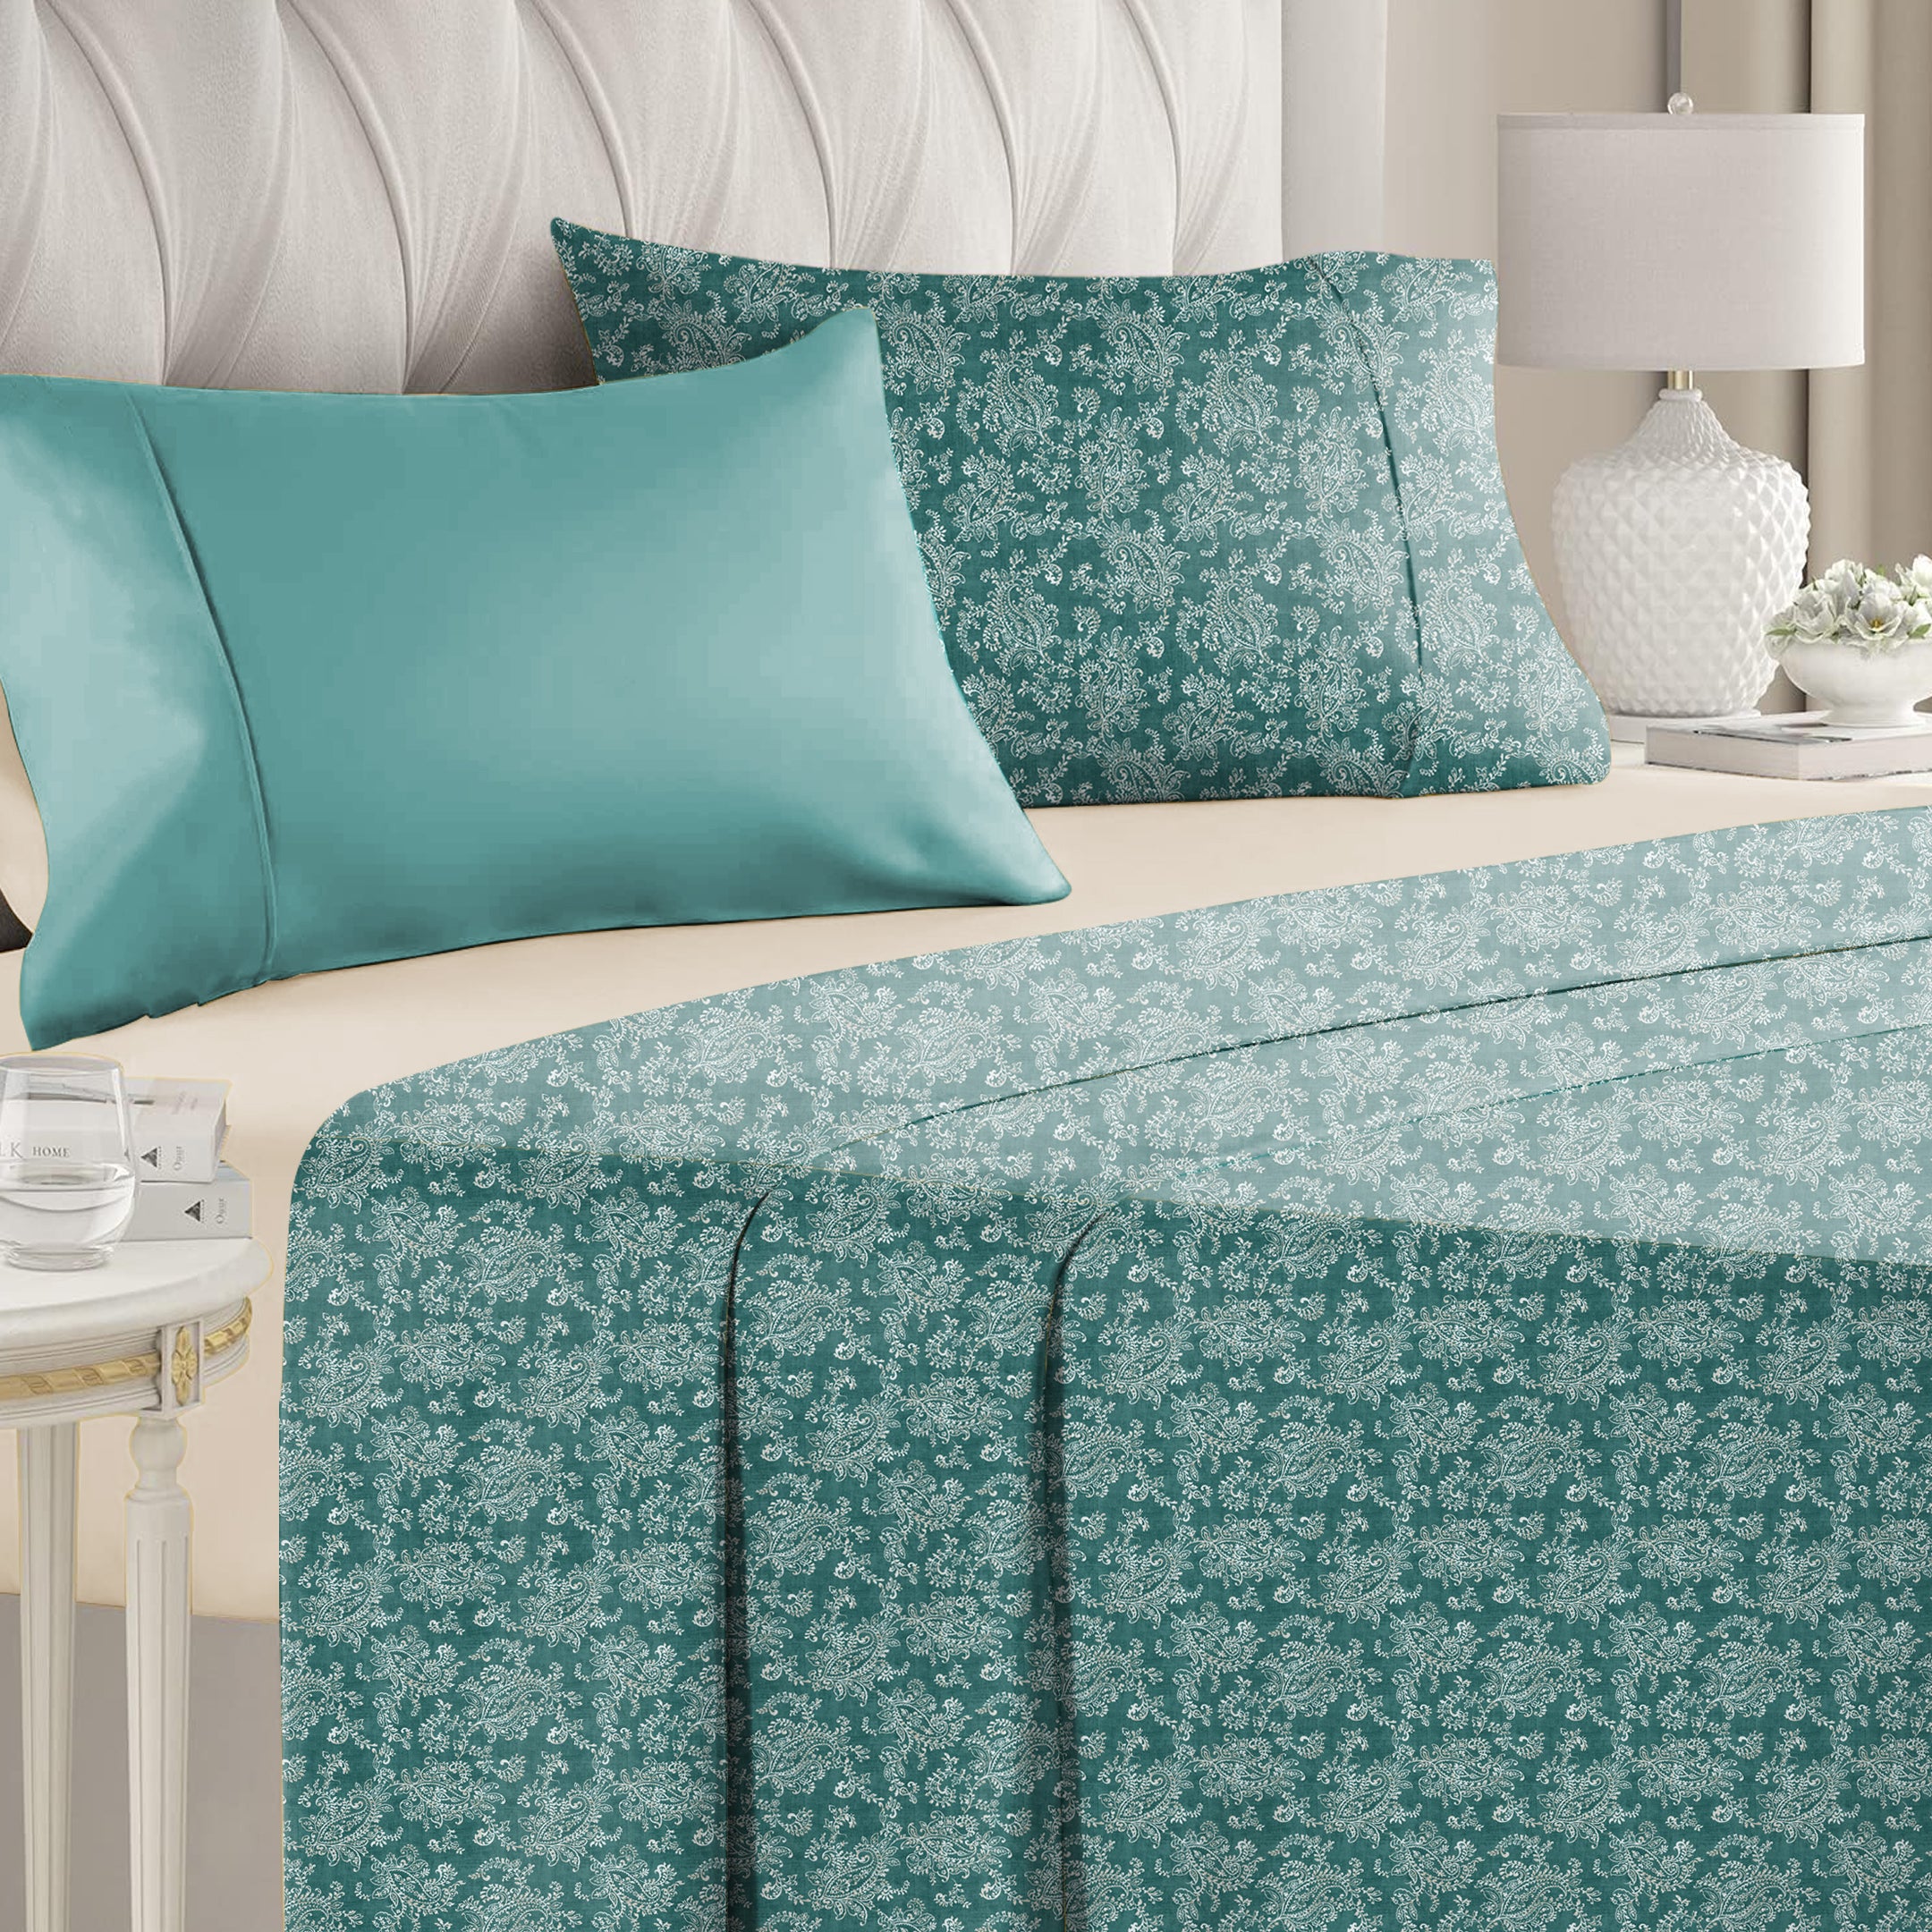 Jodhpur Flowers Bedsheet for Double Bed with 2 PillowCovers King Size (104" X 90") Teal